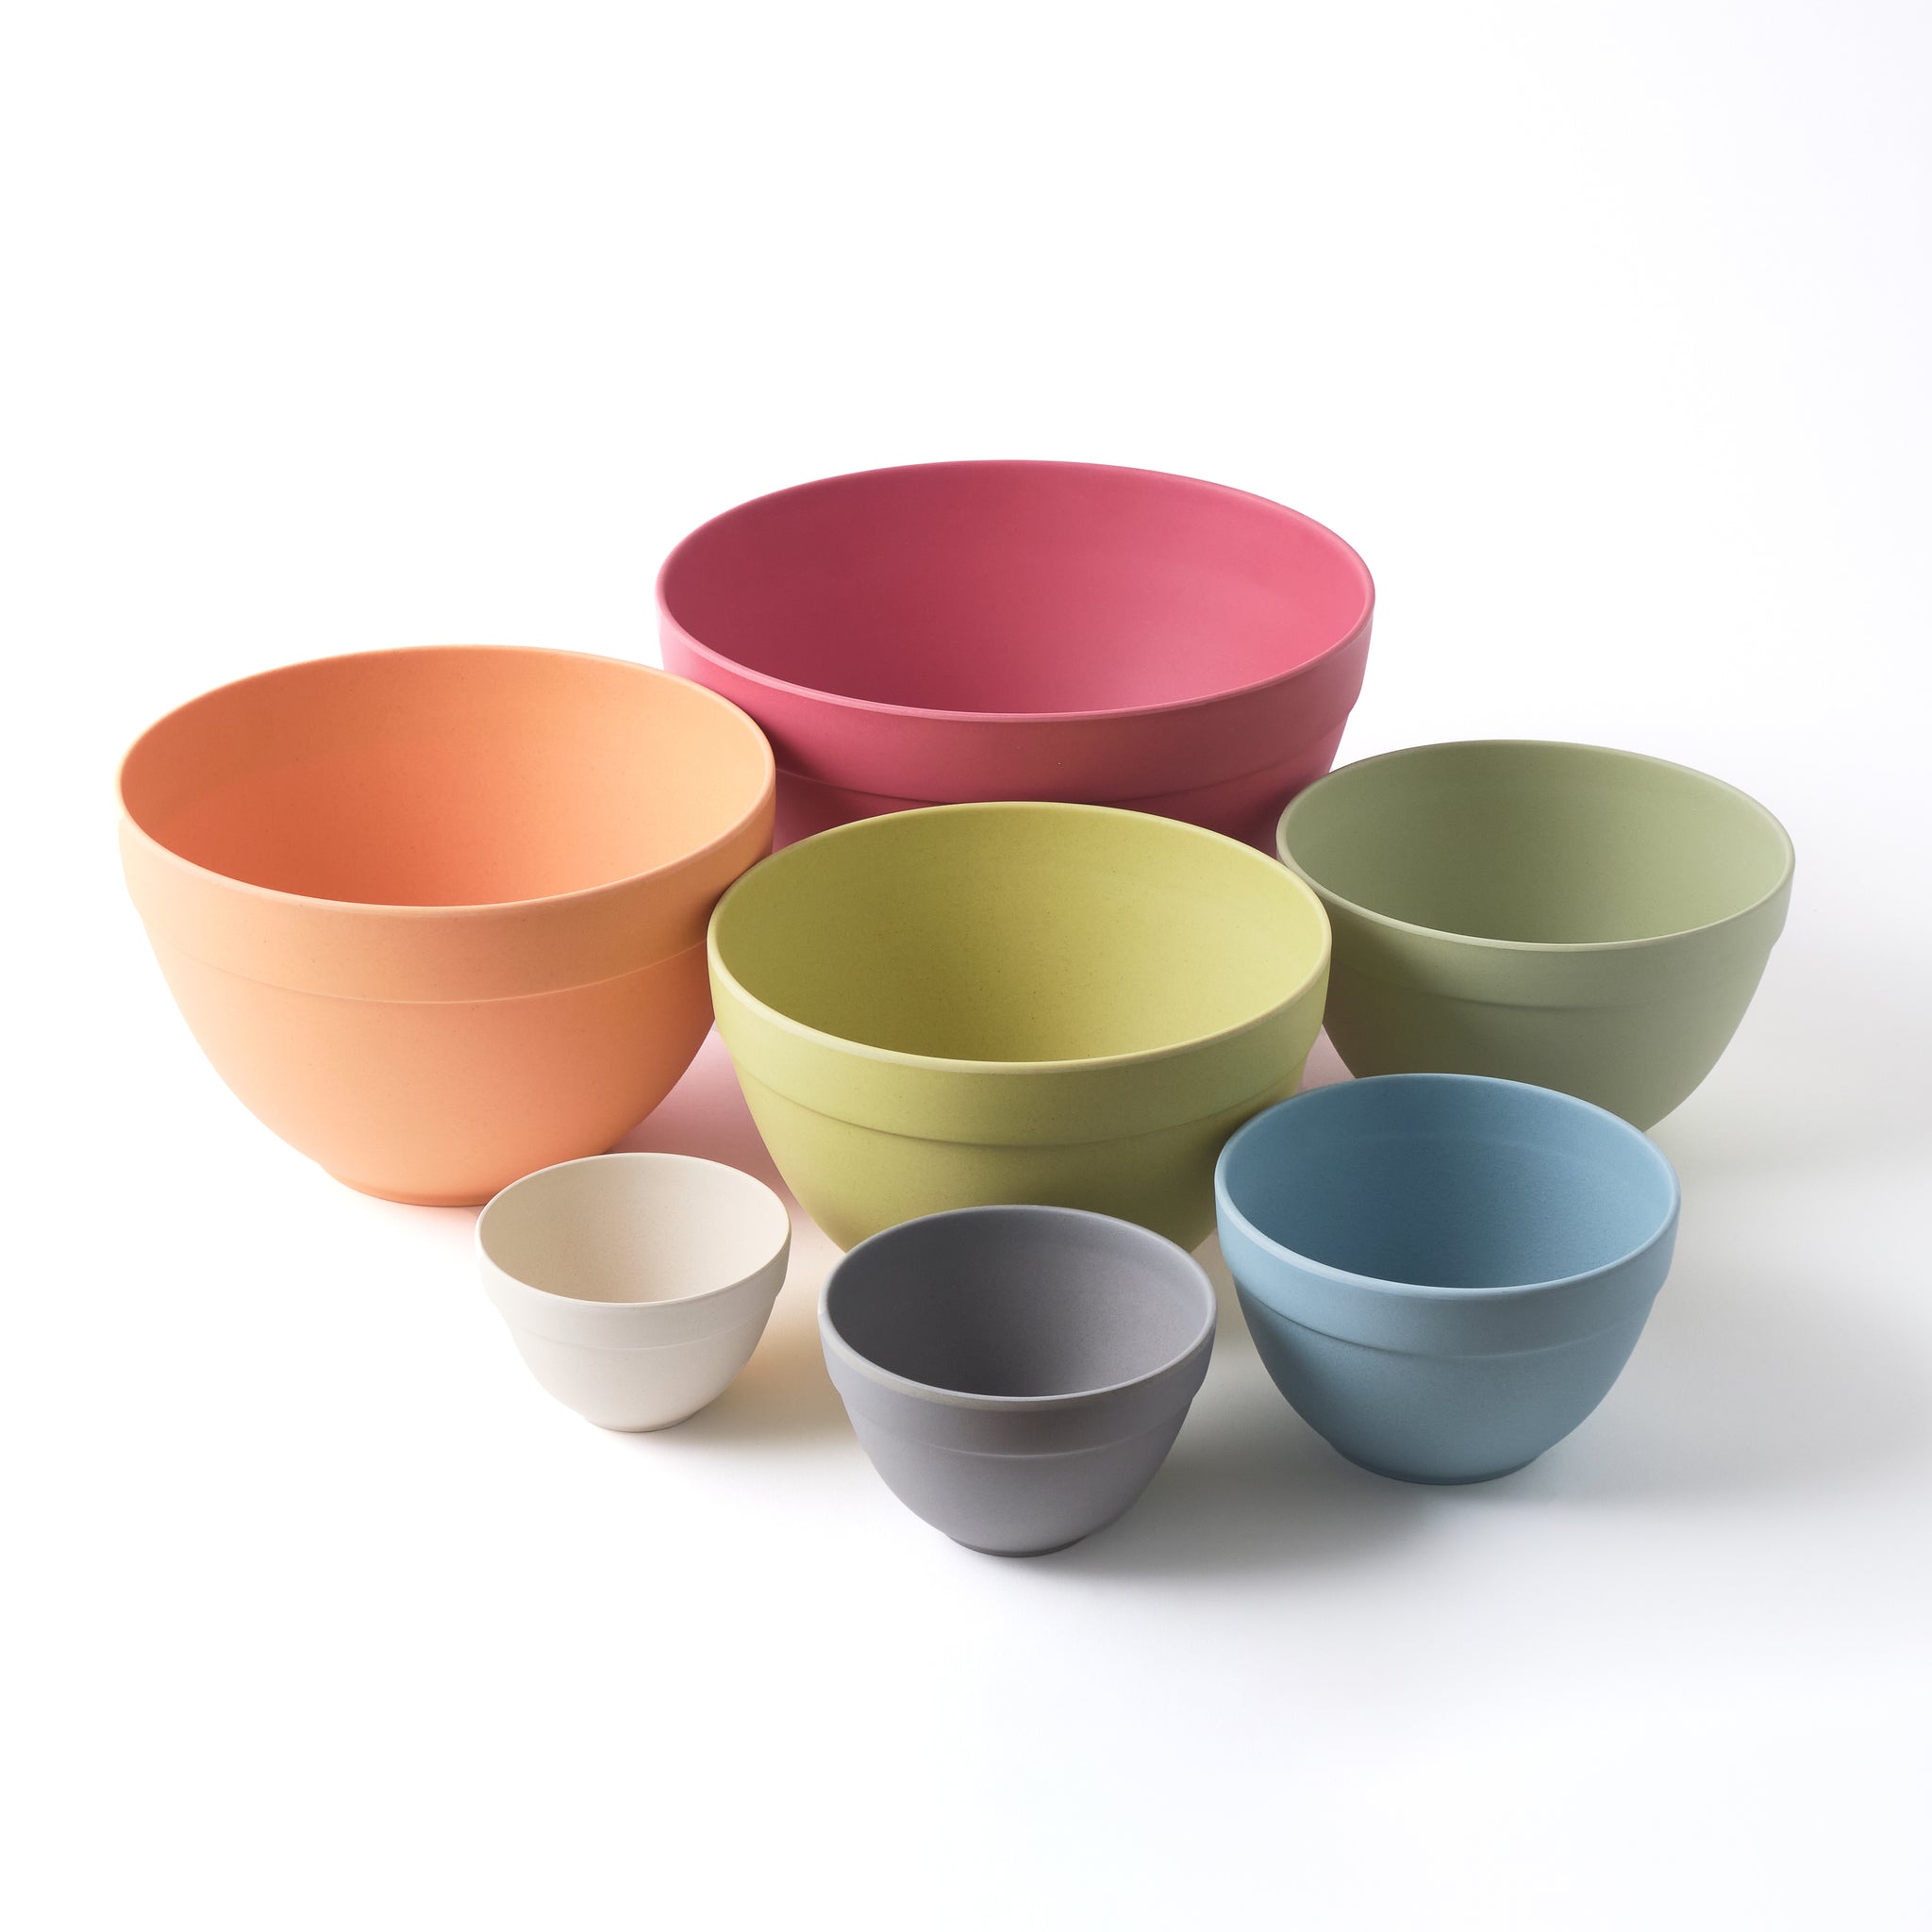 Best Overall Mixing Bowls for All Types of Cooking and Baking